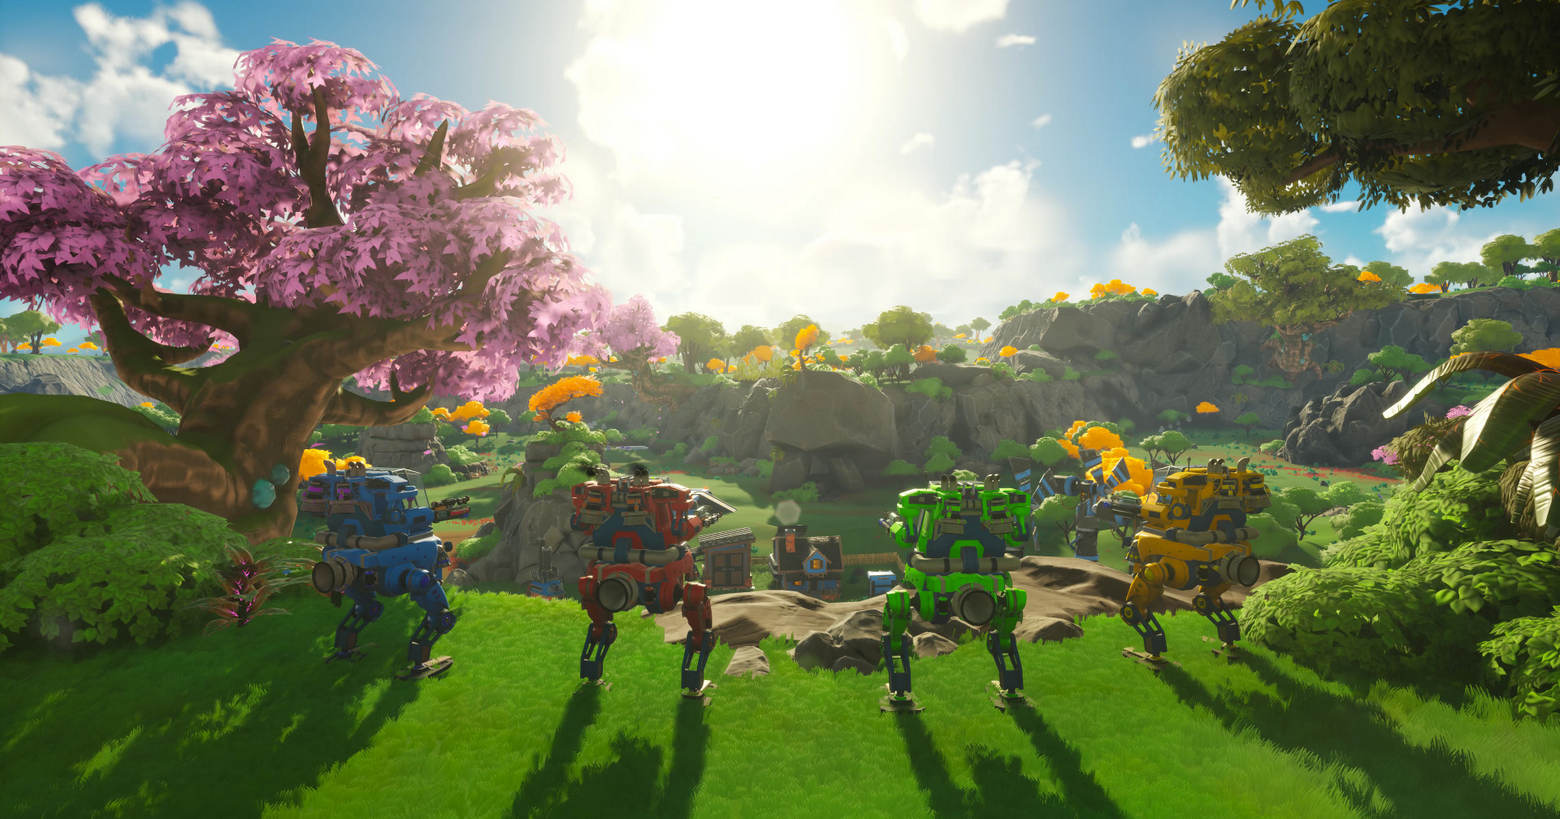 In this screenshot from Lightyear Frontier, we see four mechs of different colors standing side by side in a slight arc on a grassy field plateau and looking together toward the sun, which we see in the background at the top center of the image. The robots are shown in the foreground in a long shot in the lower half of the image. They are in a beautiful very green hilly landscape, covered with numerous green grasses, bushes, and trees. In the left foreground, next to the mechs, there is a large tree with pink leaves. In the background, we can see numerous yellow-leaved trees. The sun casts a very atmospheric and idyllic light on the robots and the blue cloudy sky underlines this relaxed scenario.